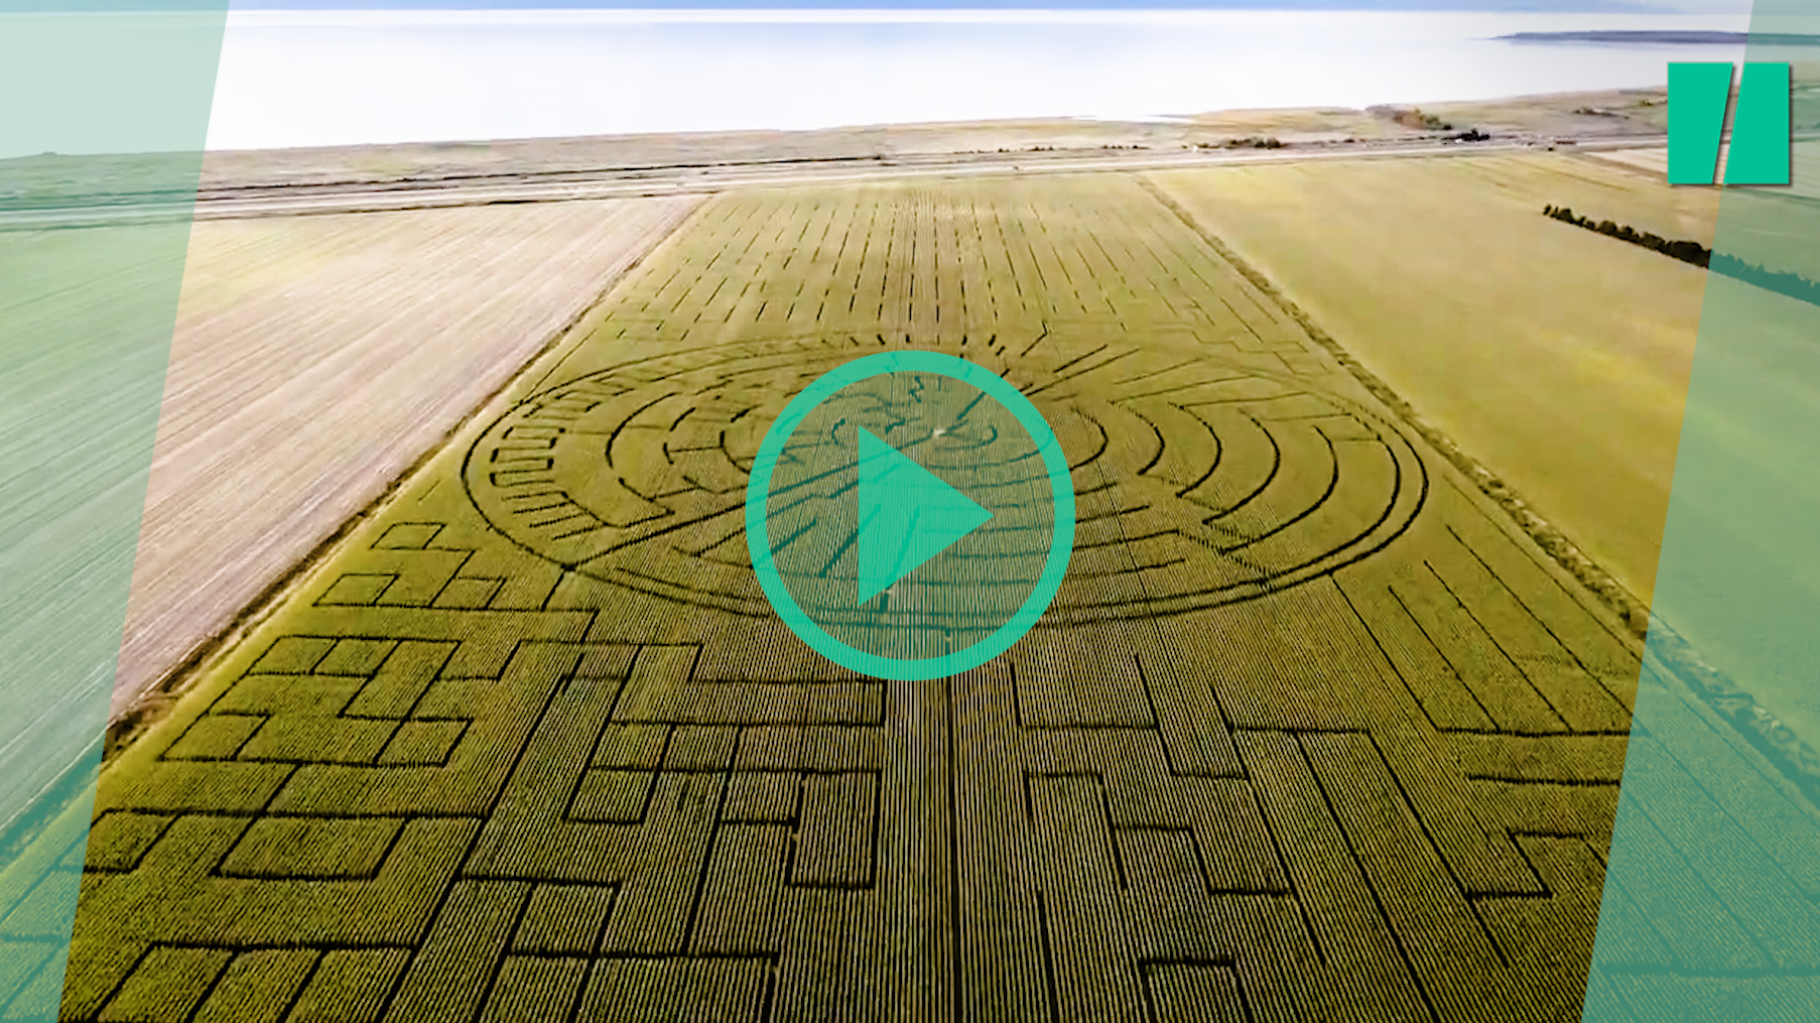 This field is now the largest corn maze in the world